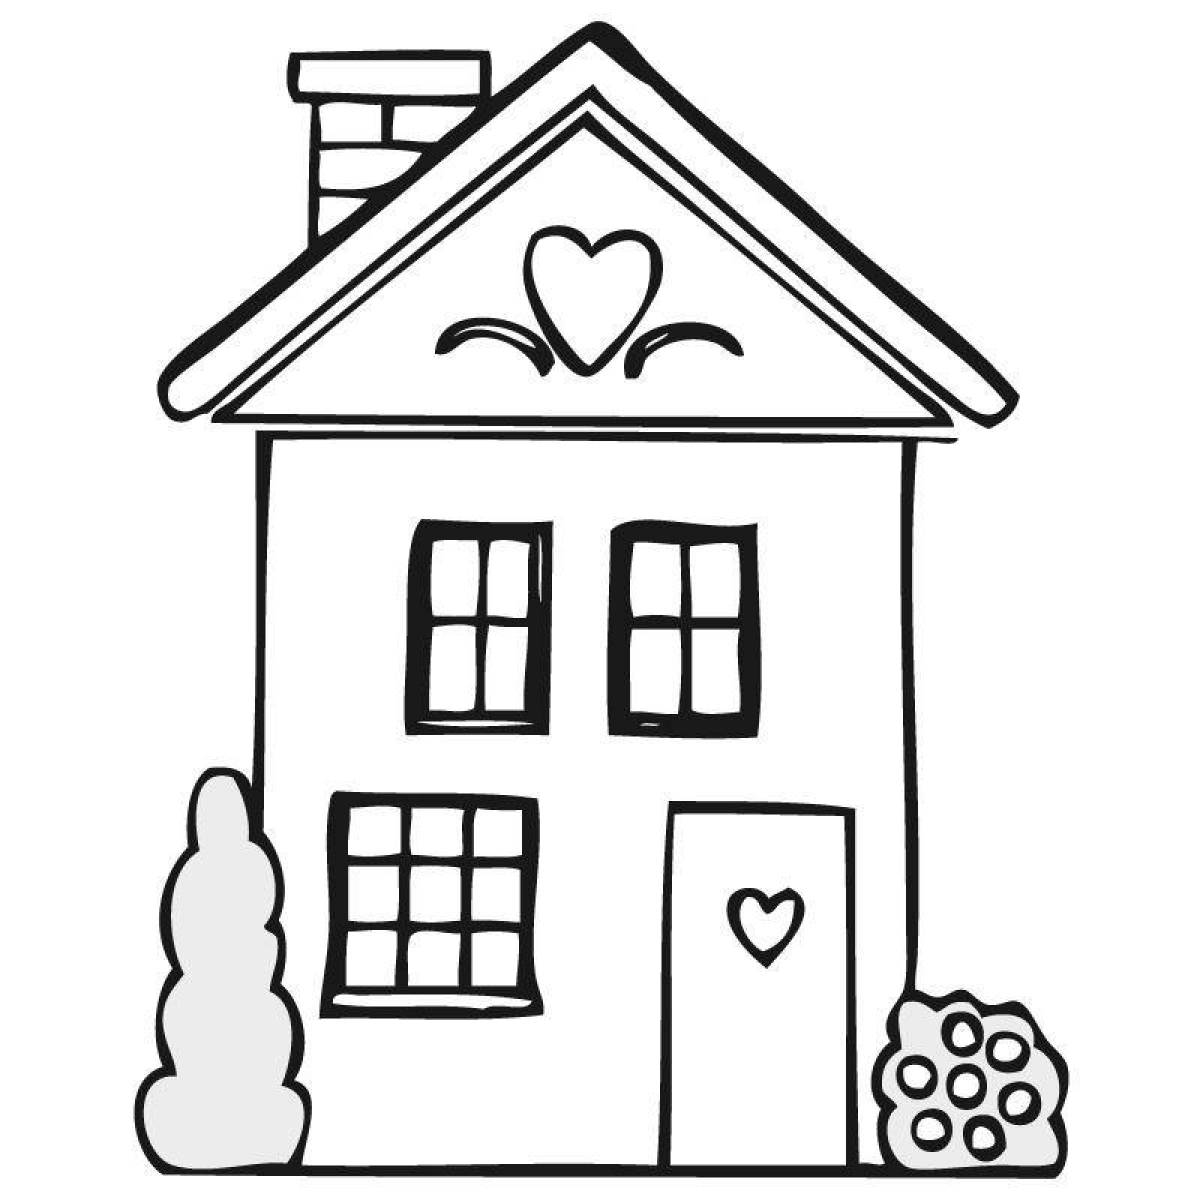 Amazing simple house coloring book